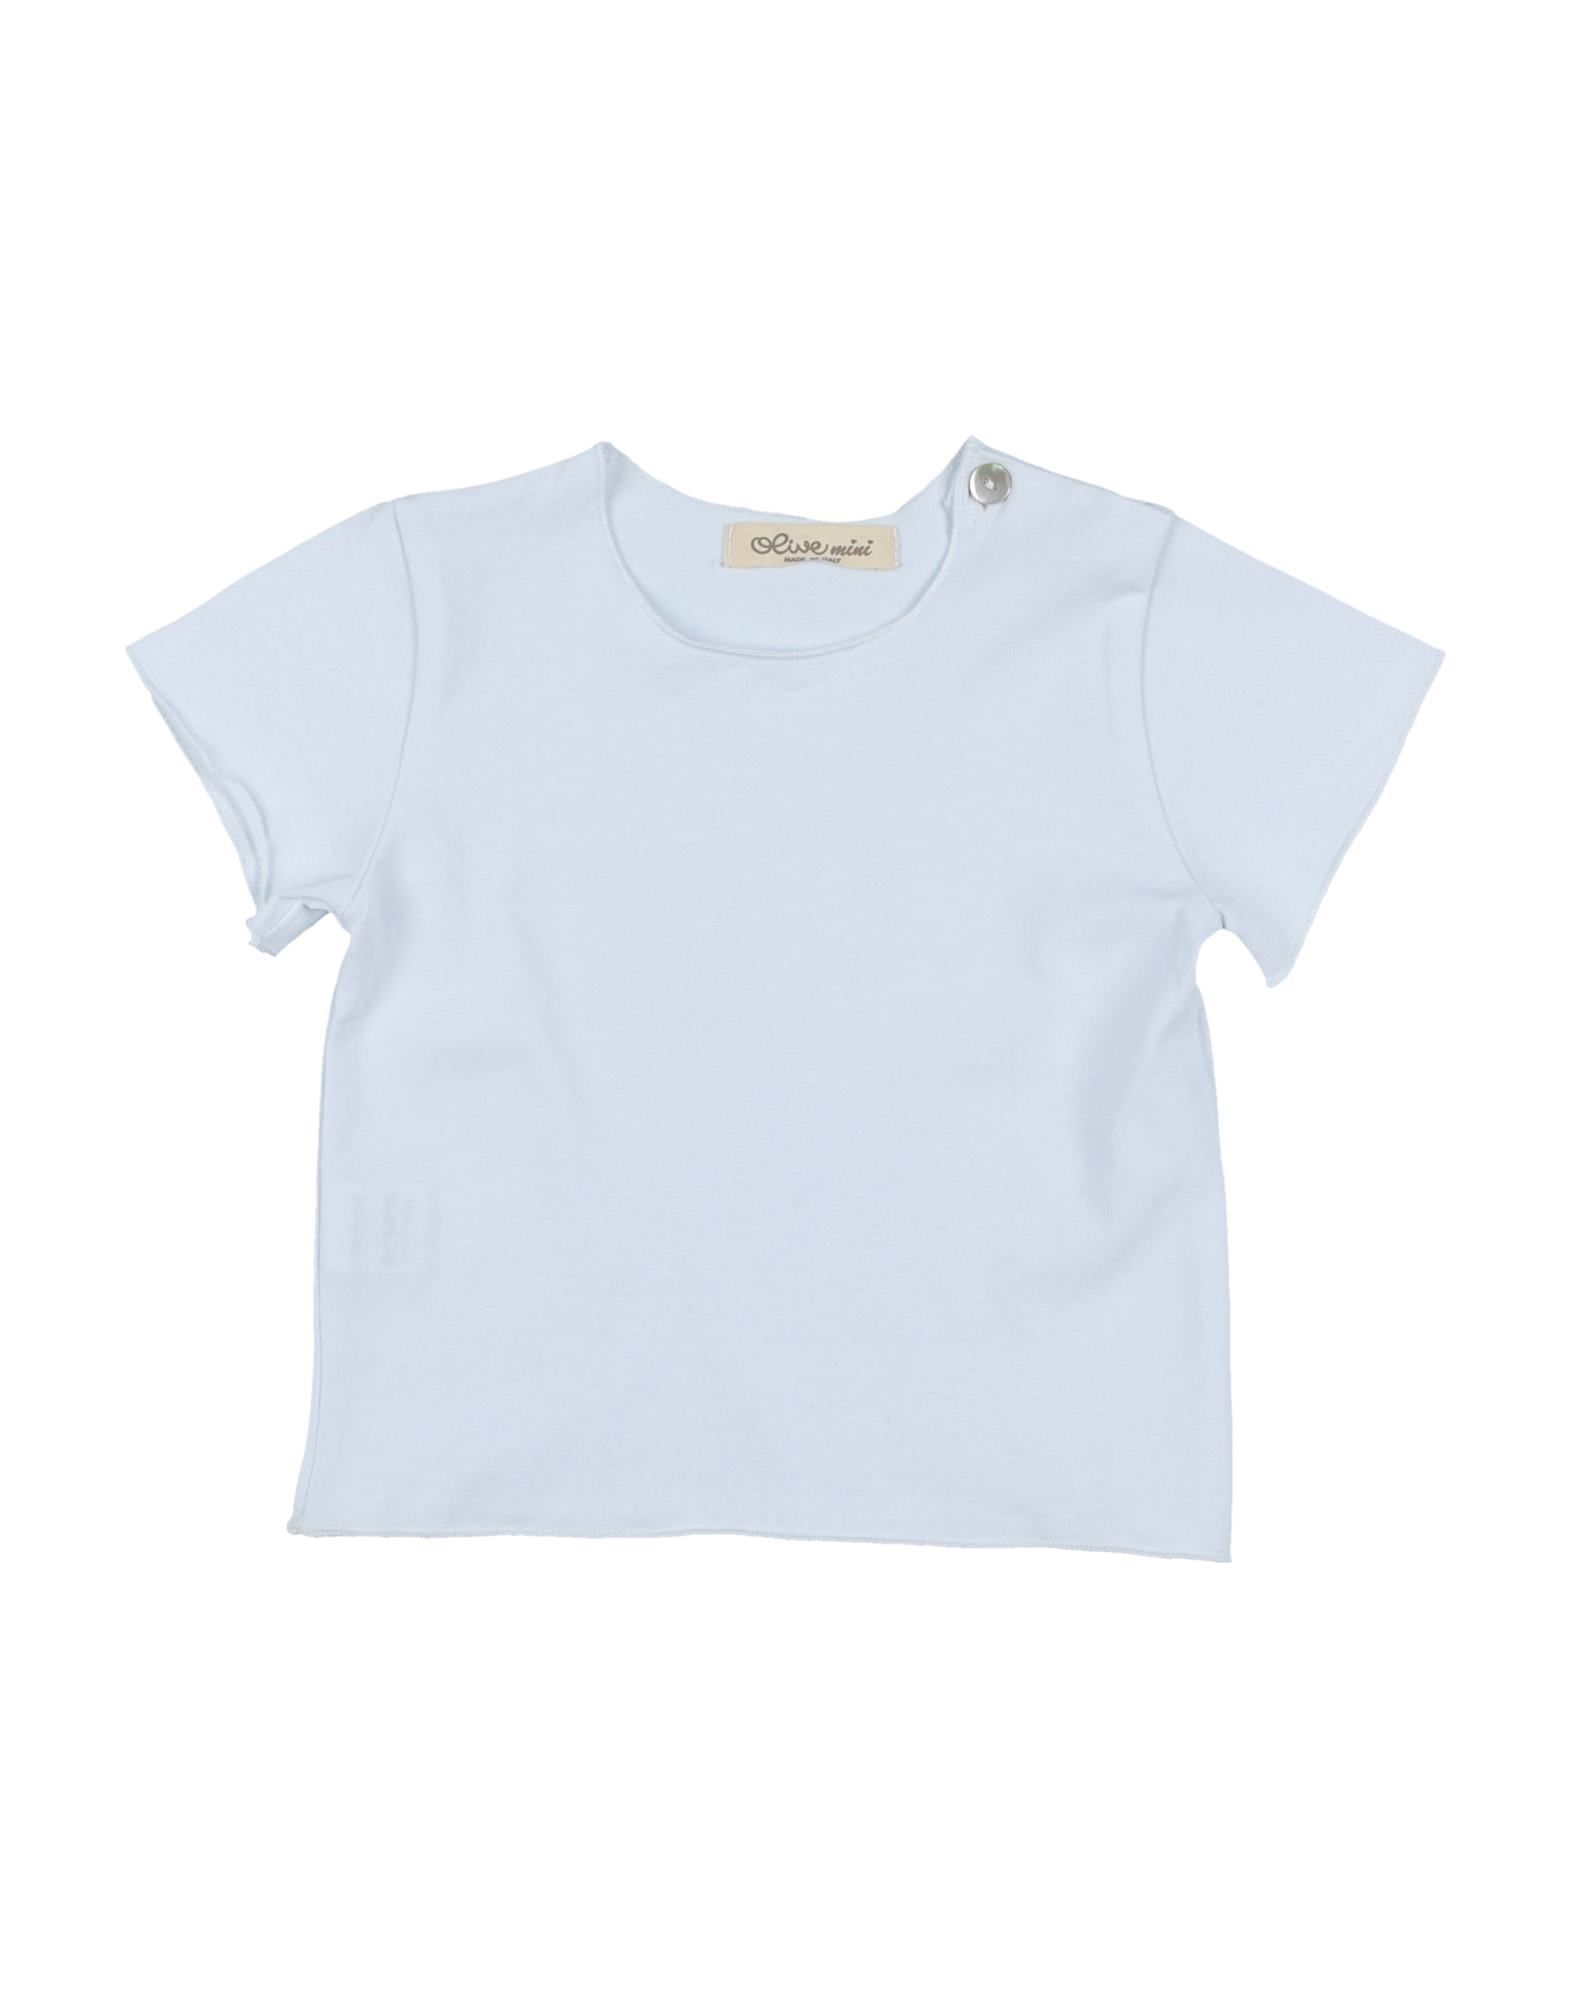 Olive Kids' T-shirts In White